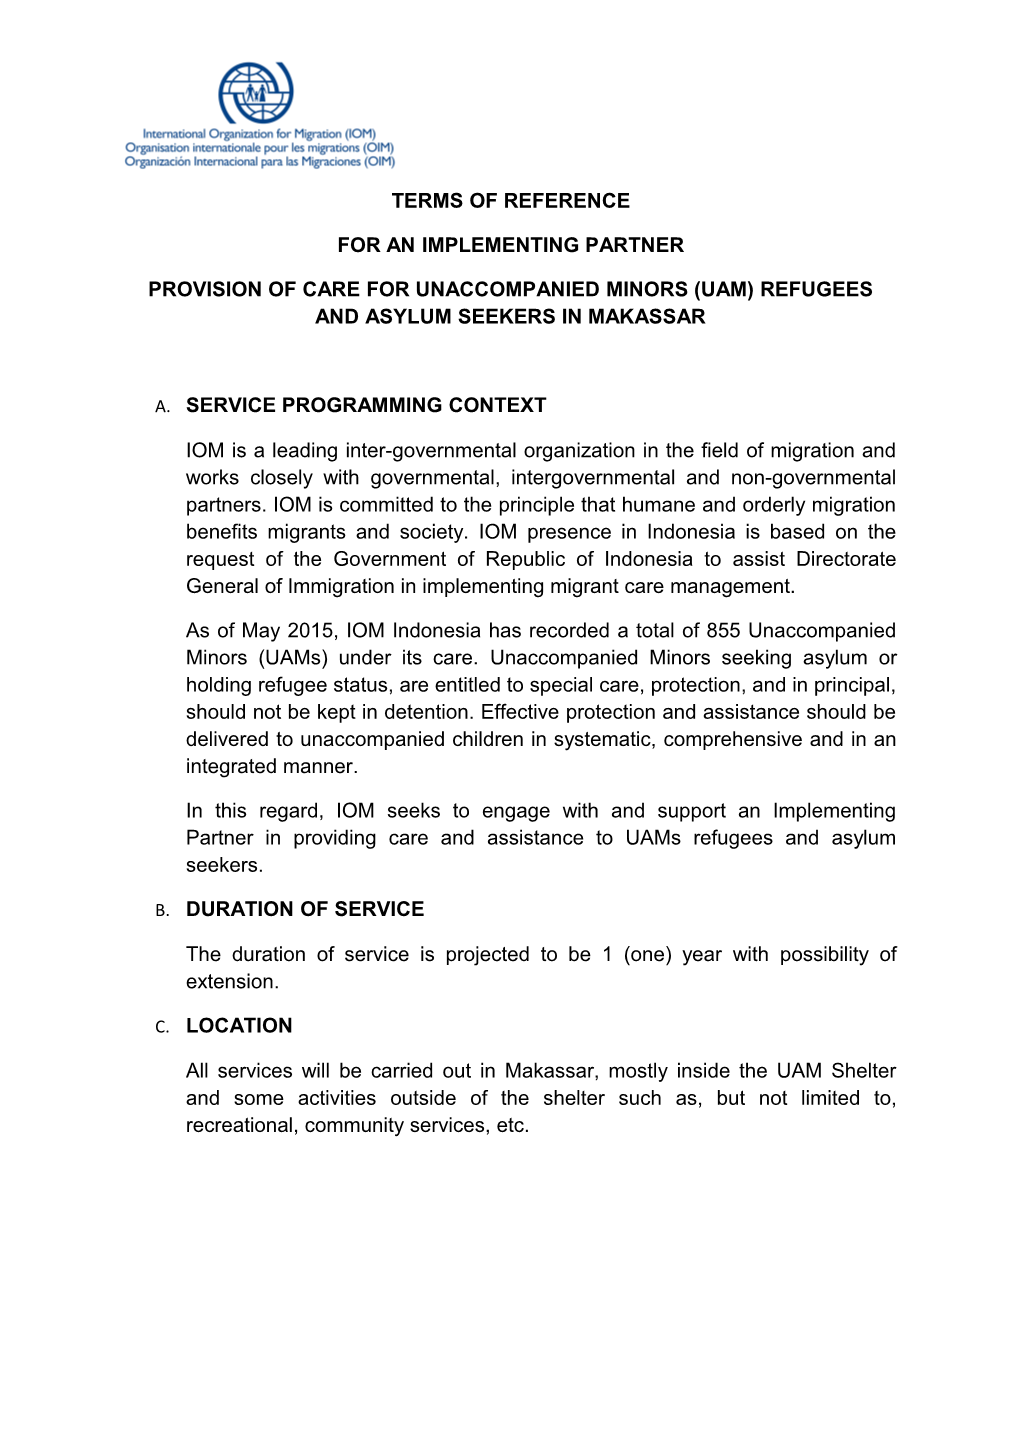 Provision of Care for Unaccompanied Minors (Uam) Refugees and Asylum Seekers in Makassar